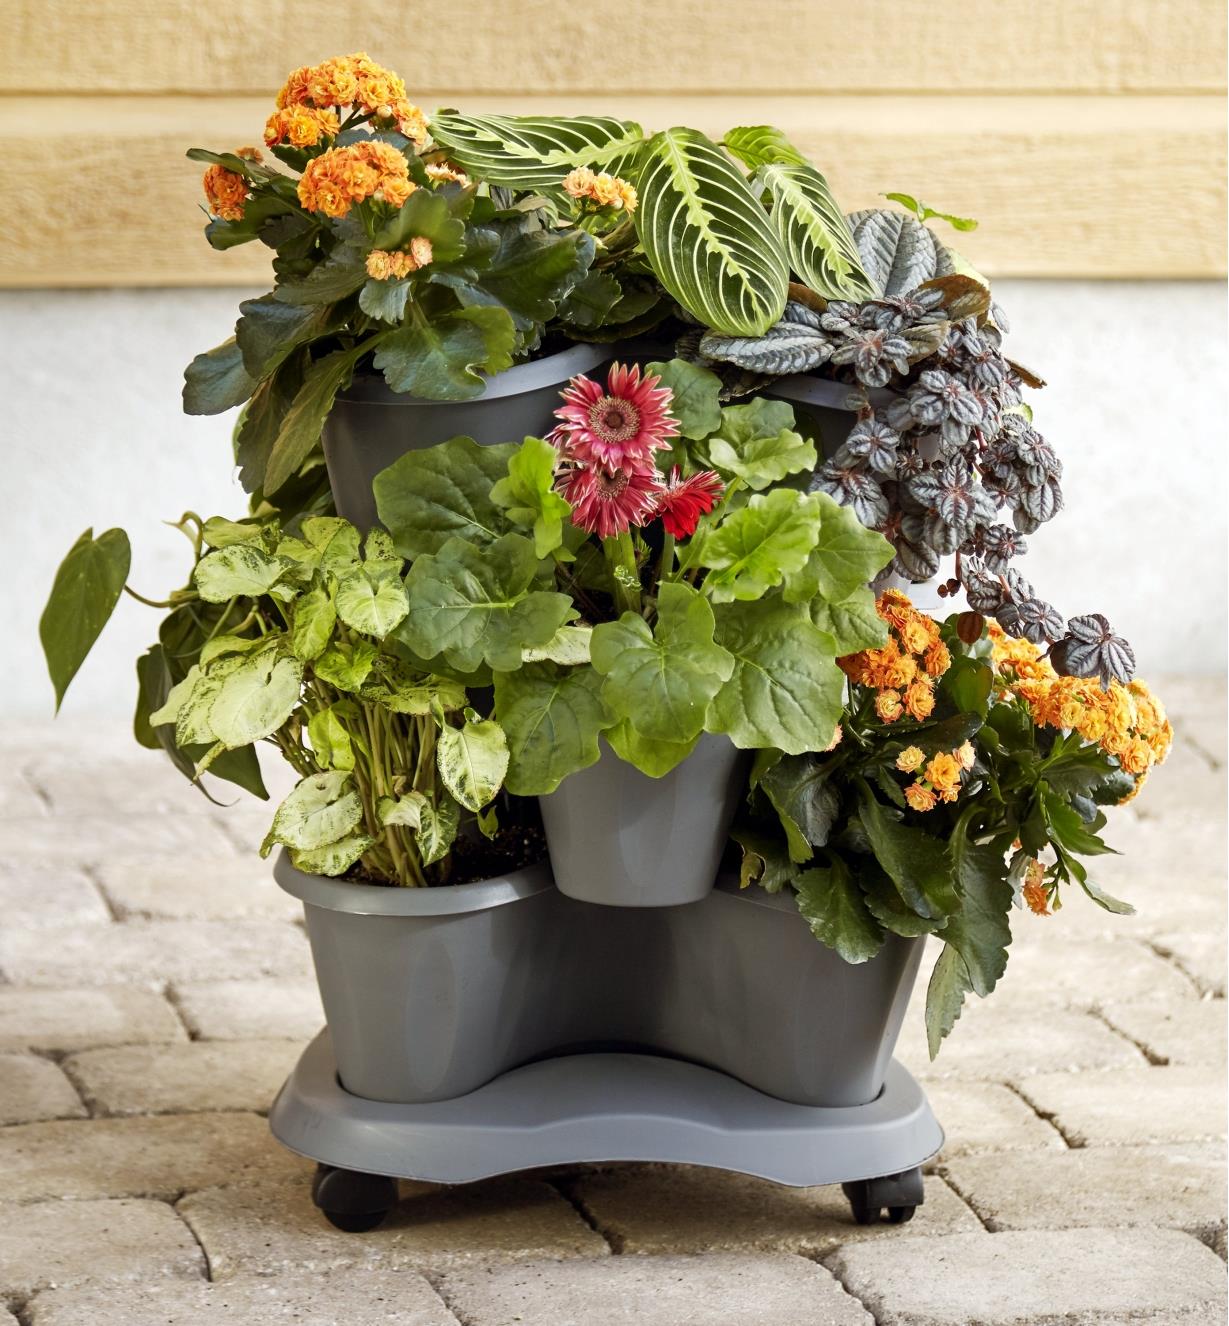 The triple planter filled with plants and flowers, sitting on the removable saucer